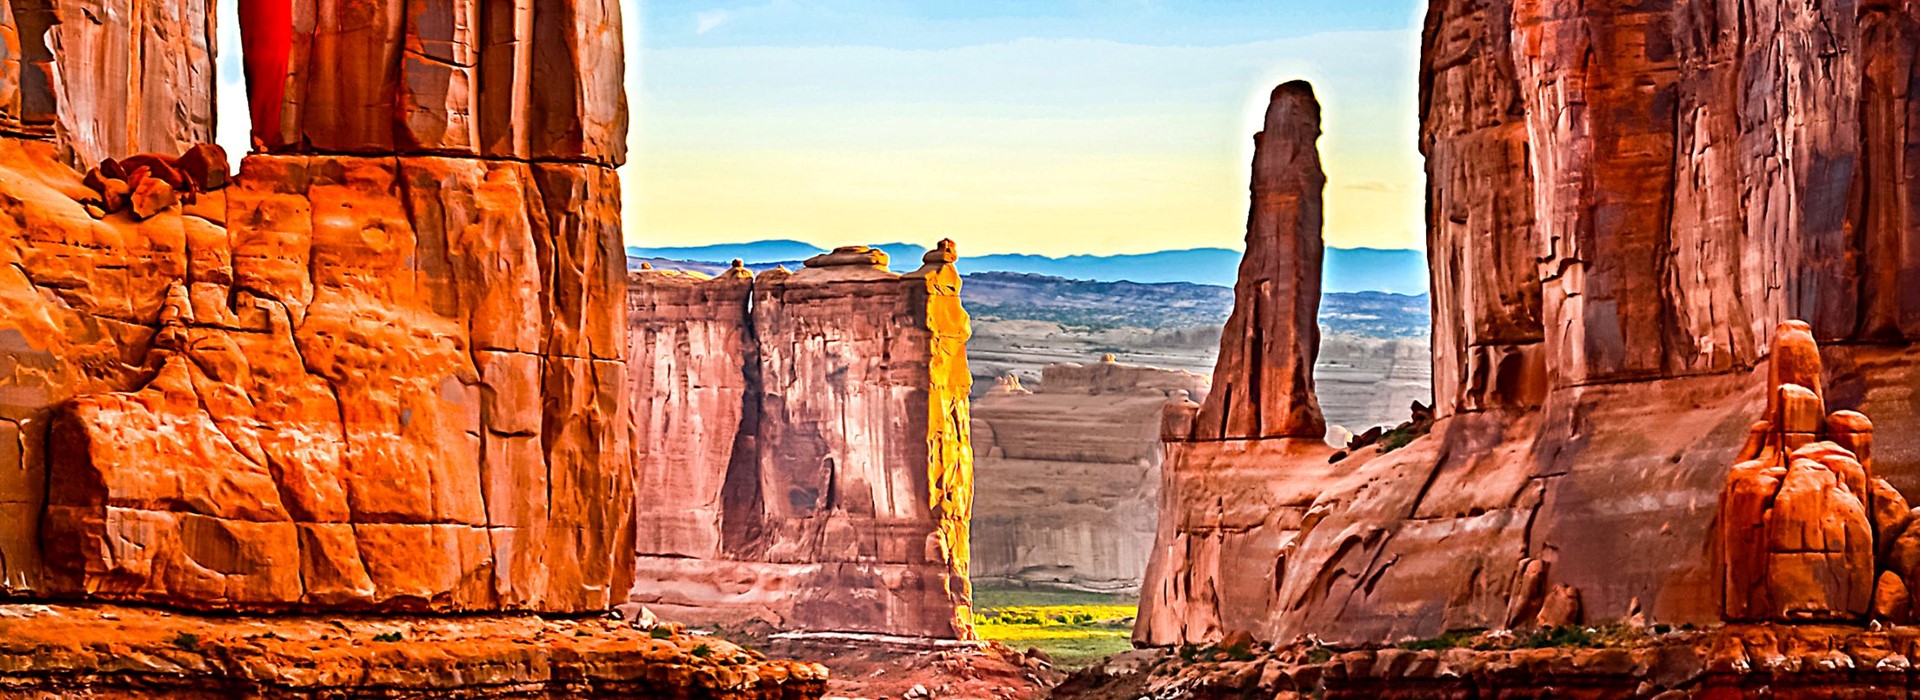 tourhub | Newmarket Holidays | America's Great National Parks with Rocky Mountaineer | 98497